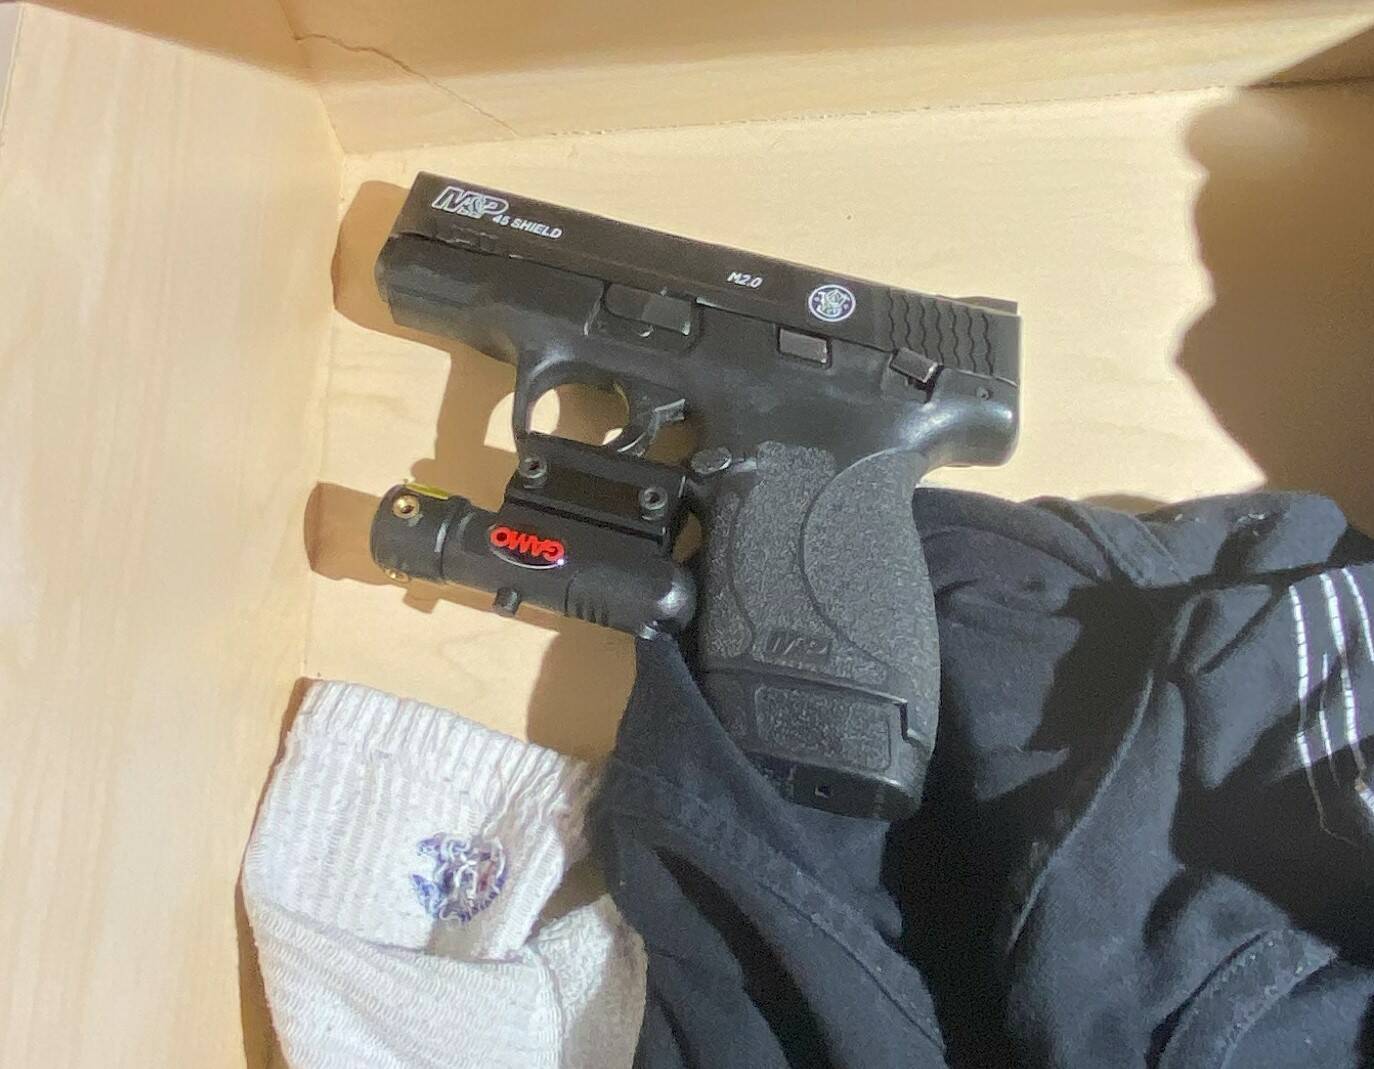 A handgun was recovered from the room of a juvenile suspect in a shooting on Thursday. (Courtesy photo / APD)